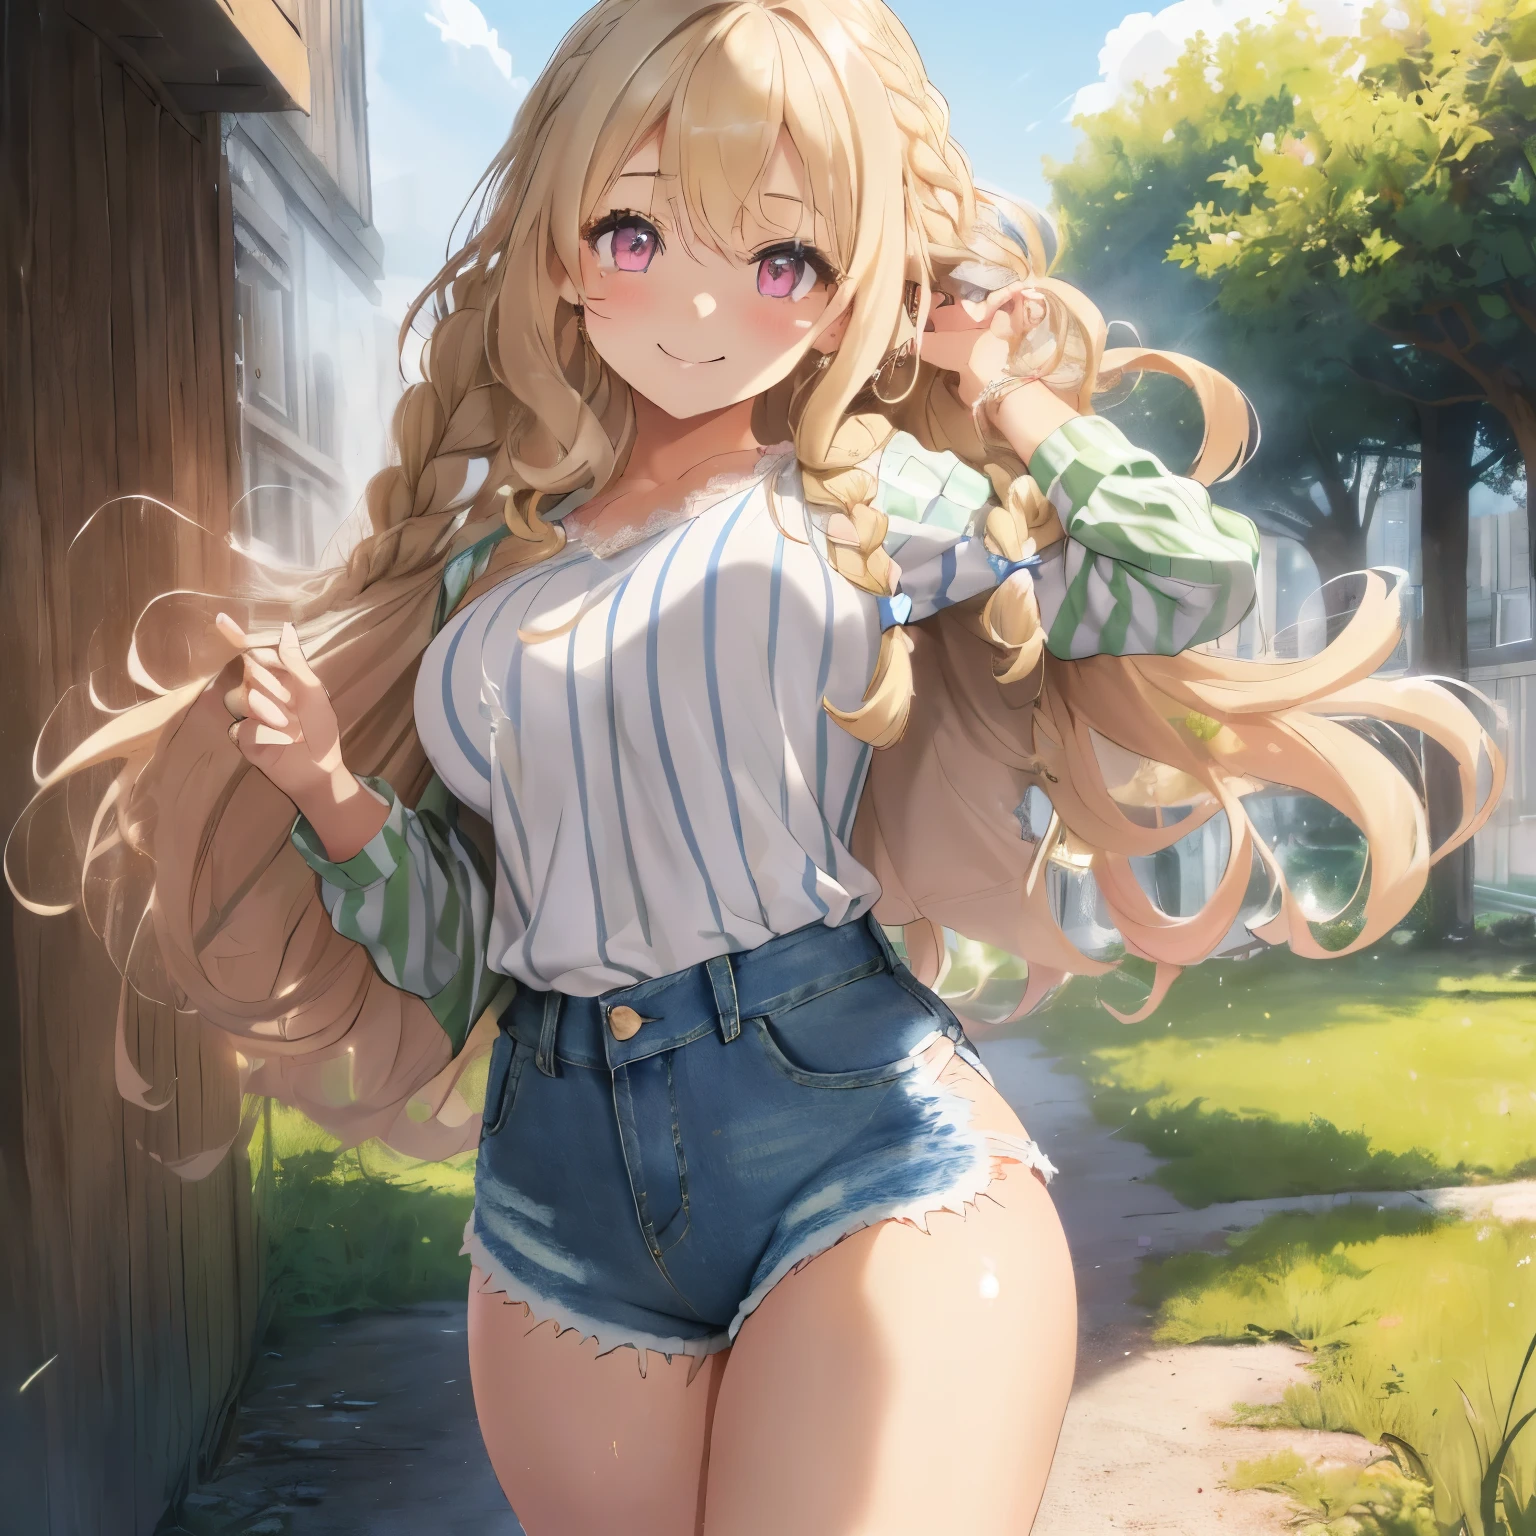 (blonde:1.3),(Curly hair with a lot of fluff:1.4),(braided hair:1.3),(With bangs),(pink eyes:1.25),Slight red tide,(Beautiful breasts spilling out of clothes:1.3),(The eyes are shining brightly:1.2),(eye size:1.7),(Commemorative photo style:1.3),(Looking at camera with a smile:1.25),(soft sunlight:1.3),(A soft atmosphere in the sky:1.25),(hair blowing in the wind:1.3),(soft smile:1.3),(cute pose:1.4),(striped long sleeve clothes:1.35),(clothes with lace:1.3),(Volume shorts made of denim material:1.35),(Continuous shooting:1.4),(white, light blue and yellow green),